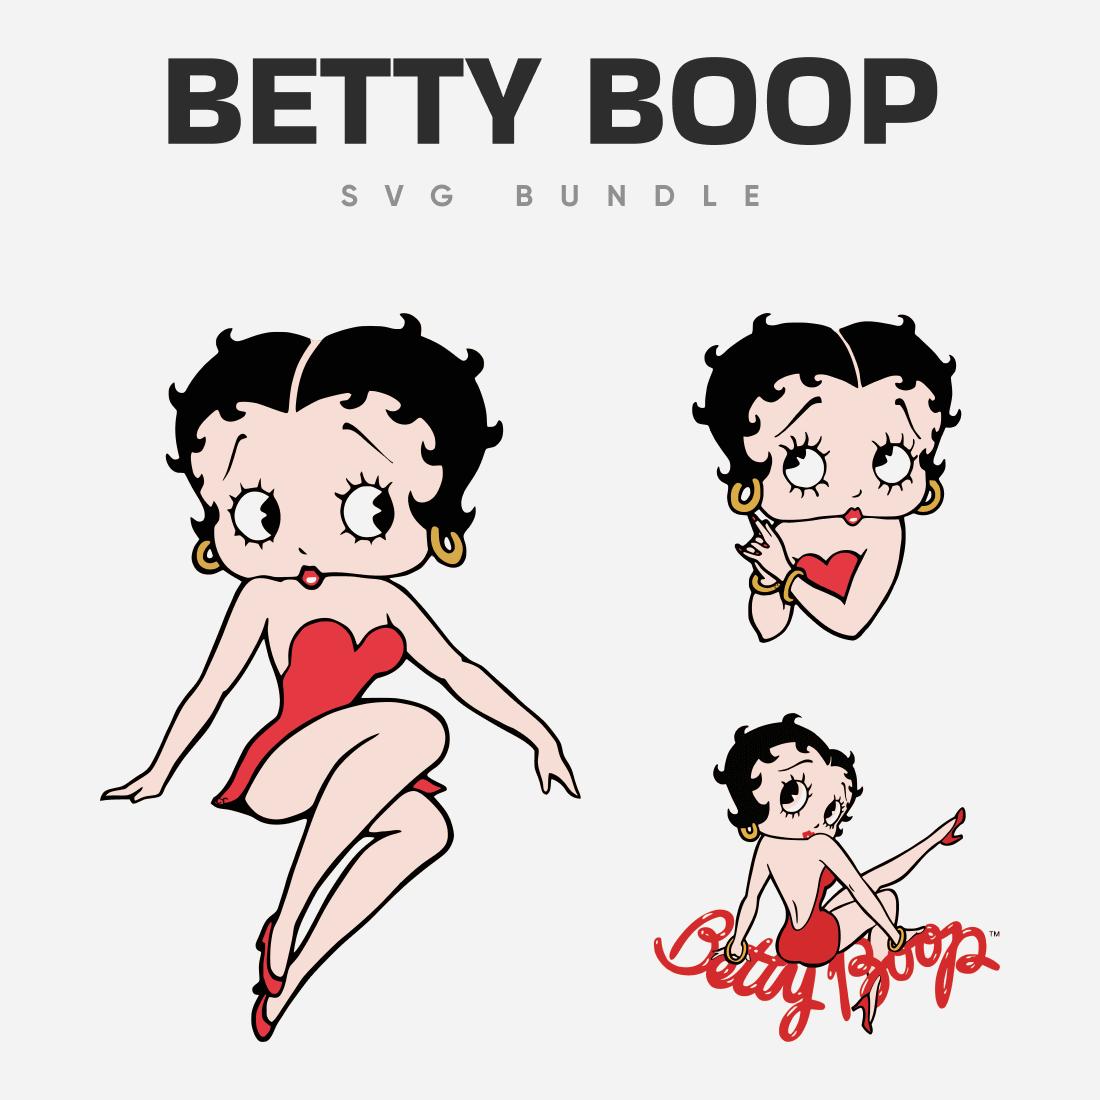 Brunette Betty Boop in a red dress and shoes with gold earrings.